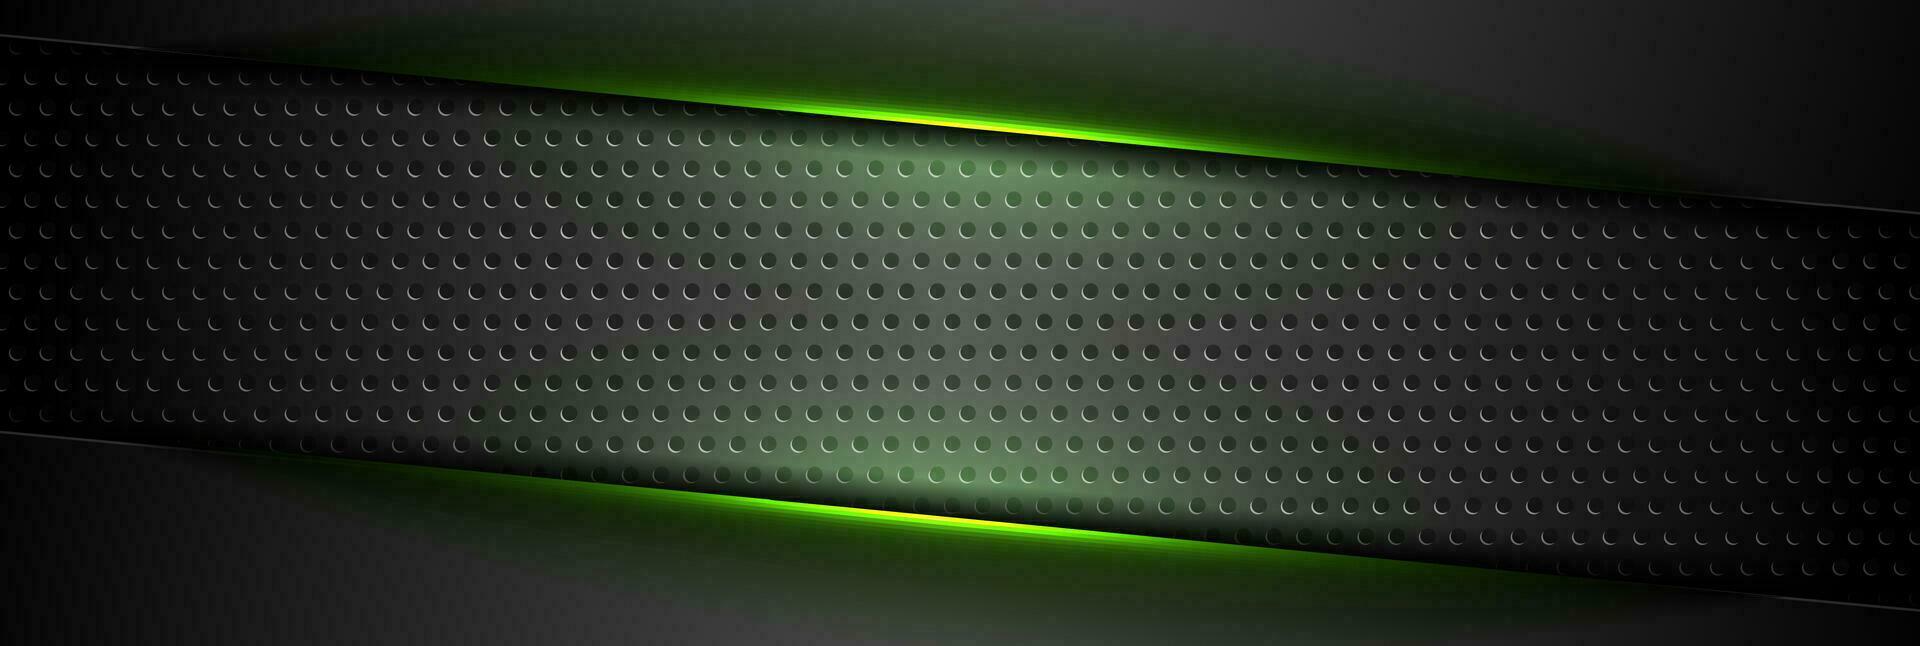 Futuristic technology background with green glowing lines vector